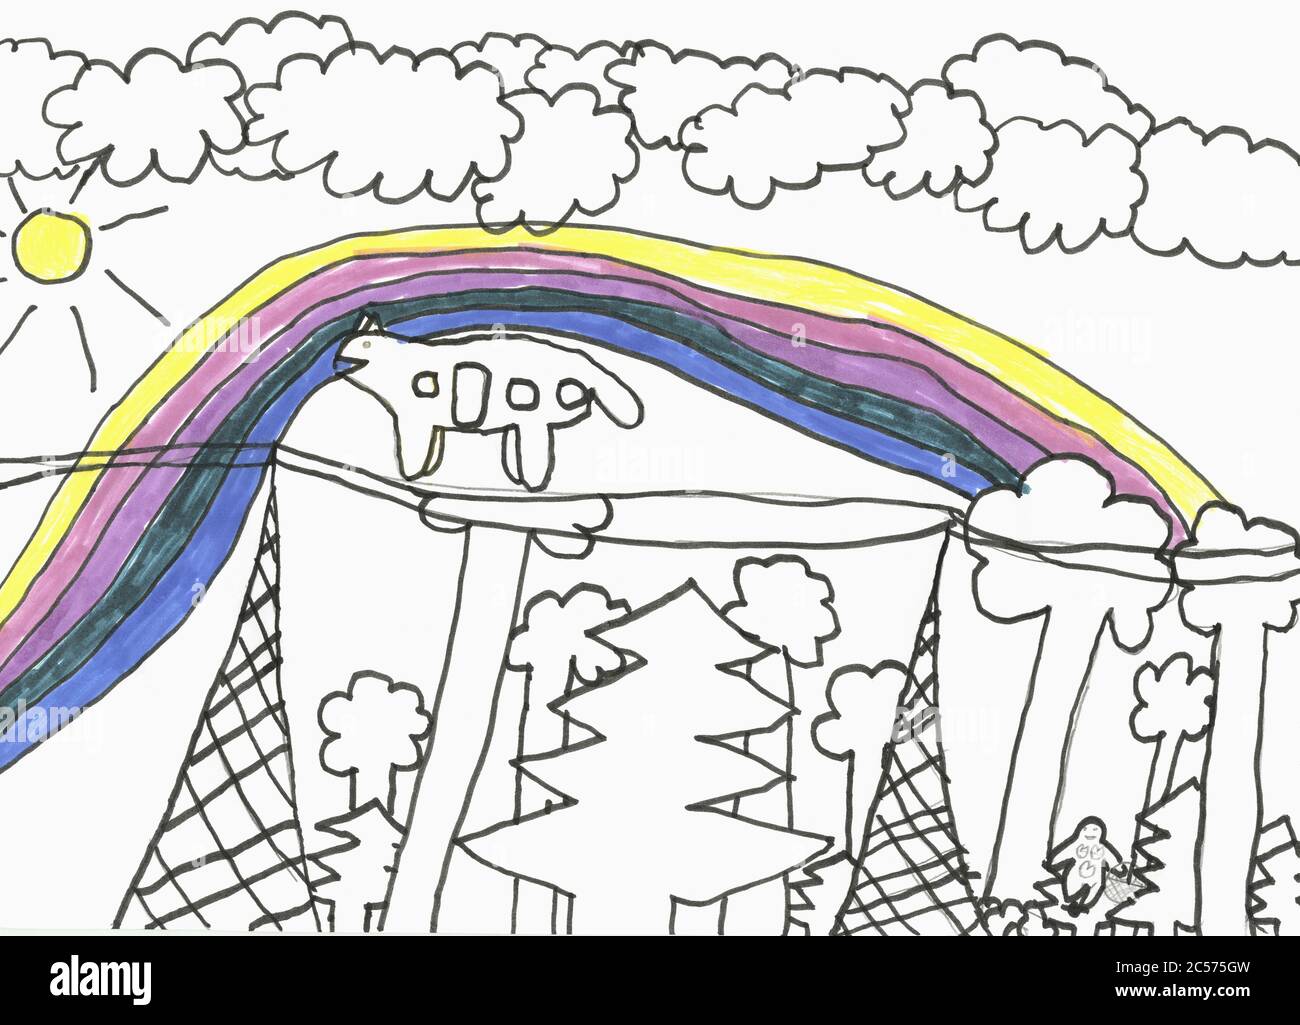 Childs drawing rainbow and trees Stock Photo